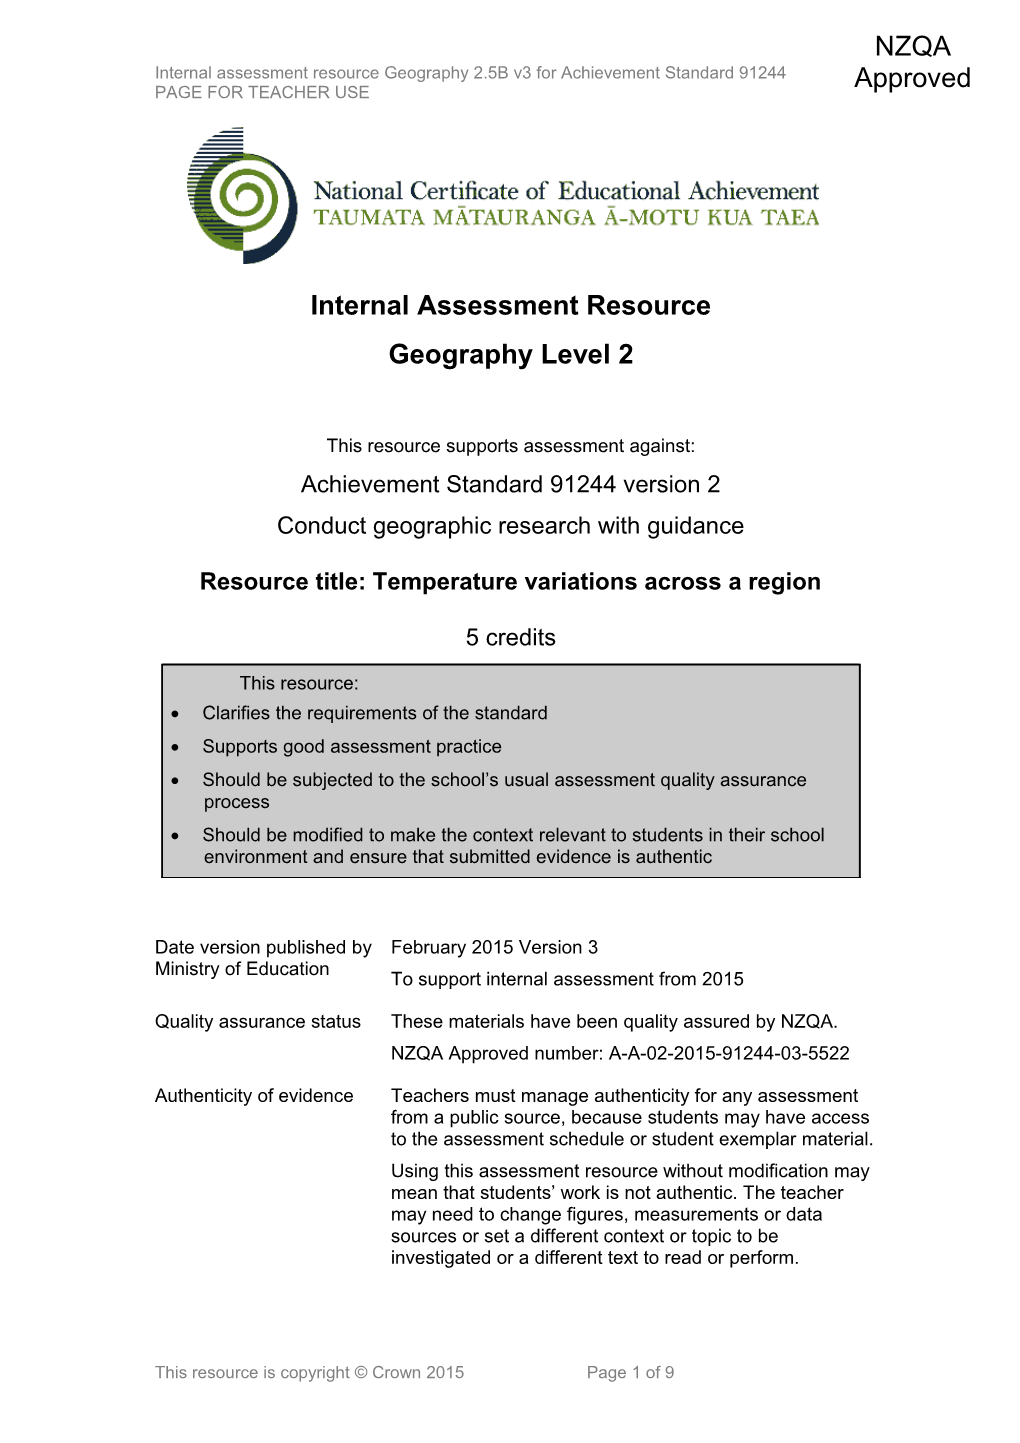 Level 2 Geography Internal Assessment Resource